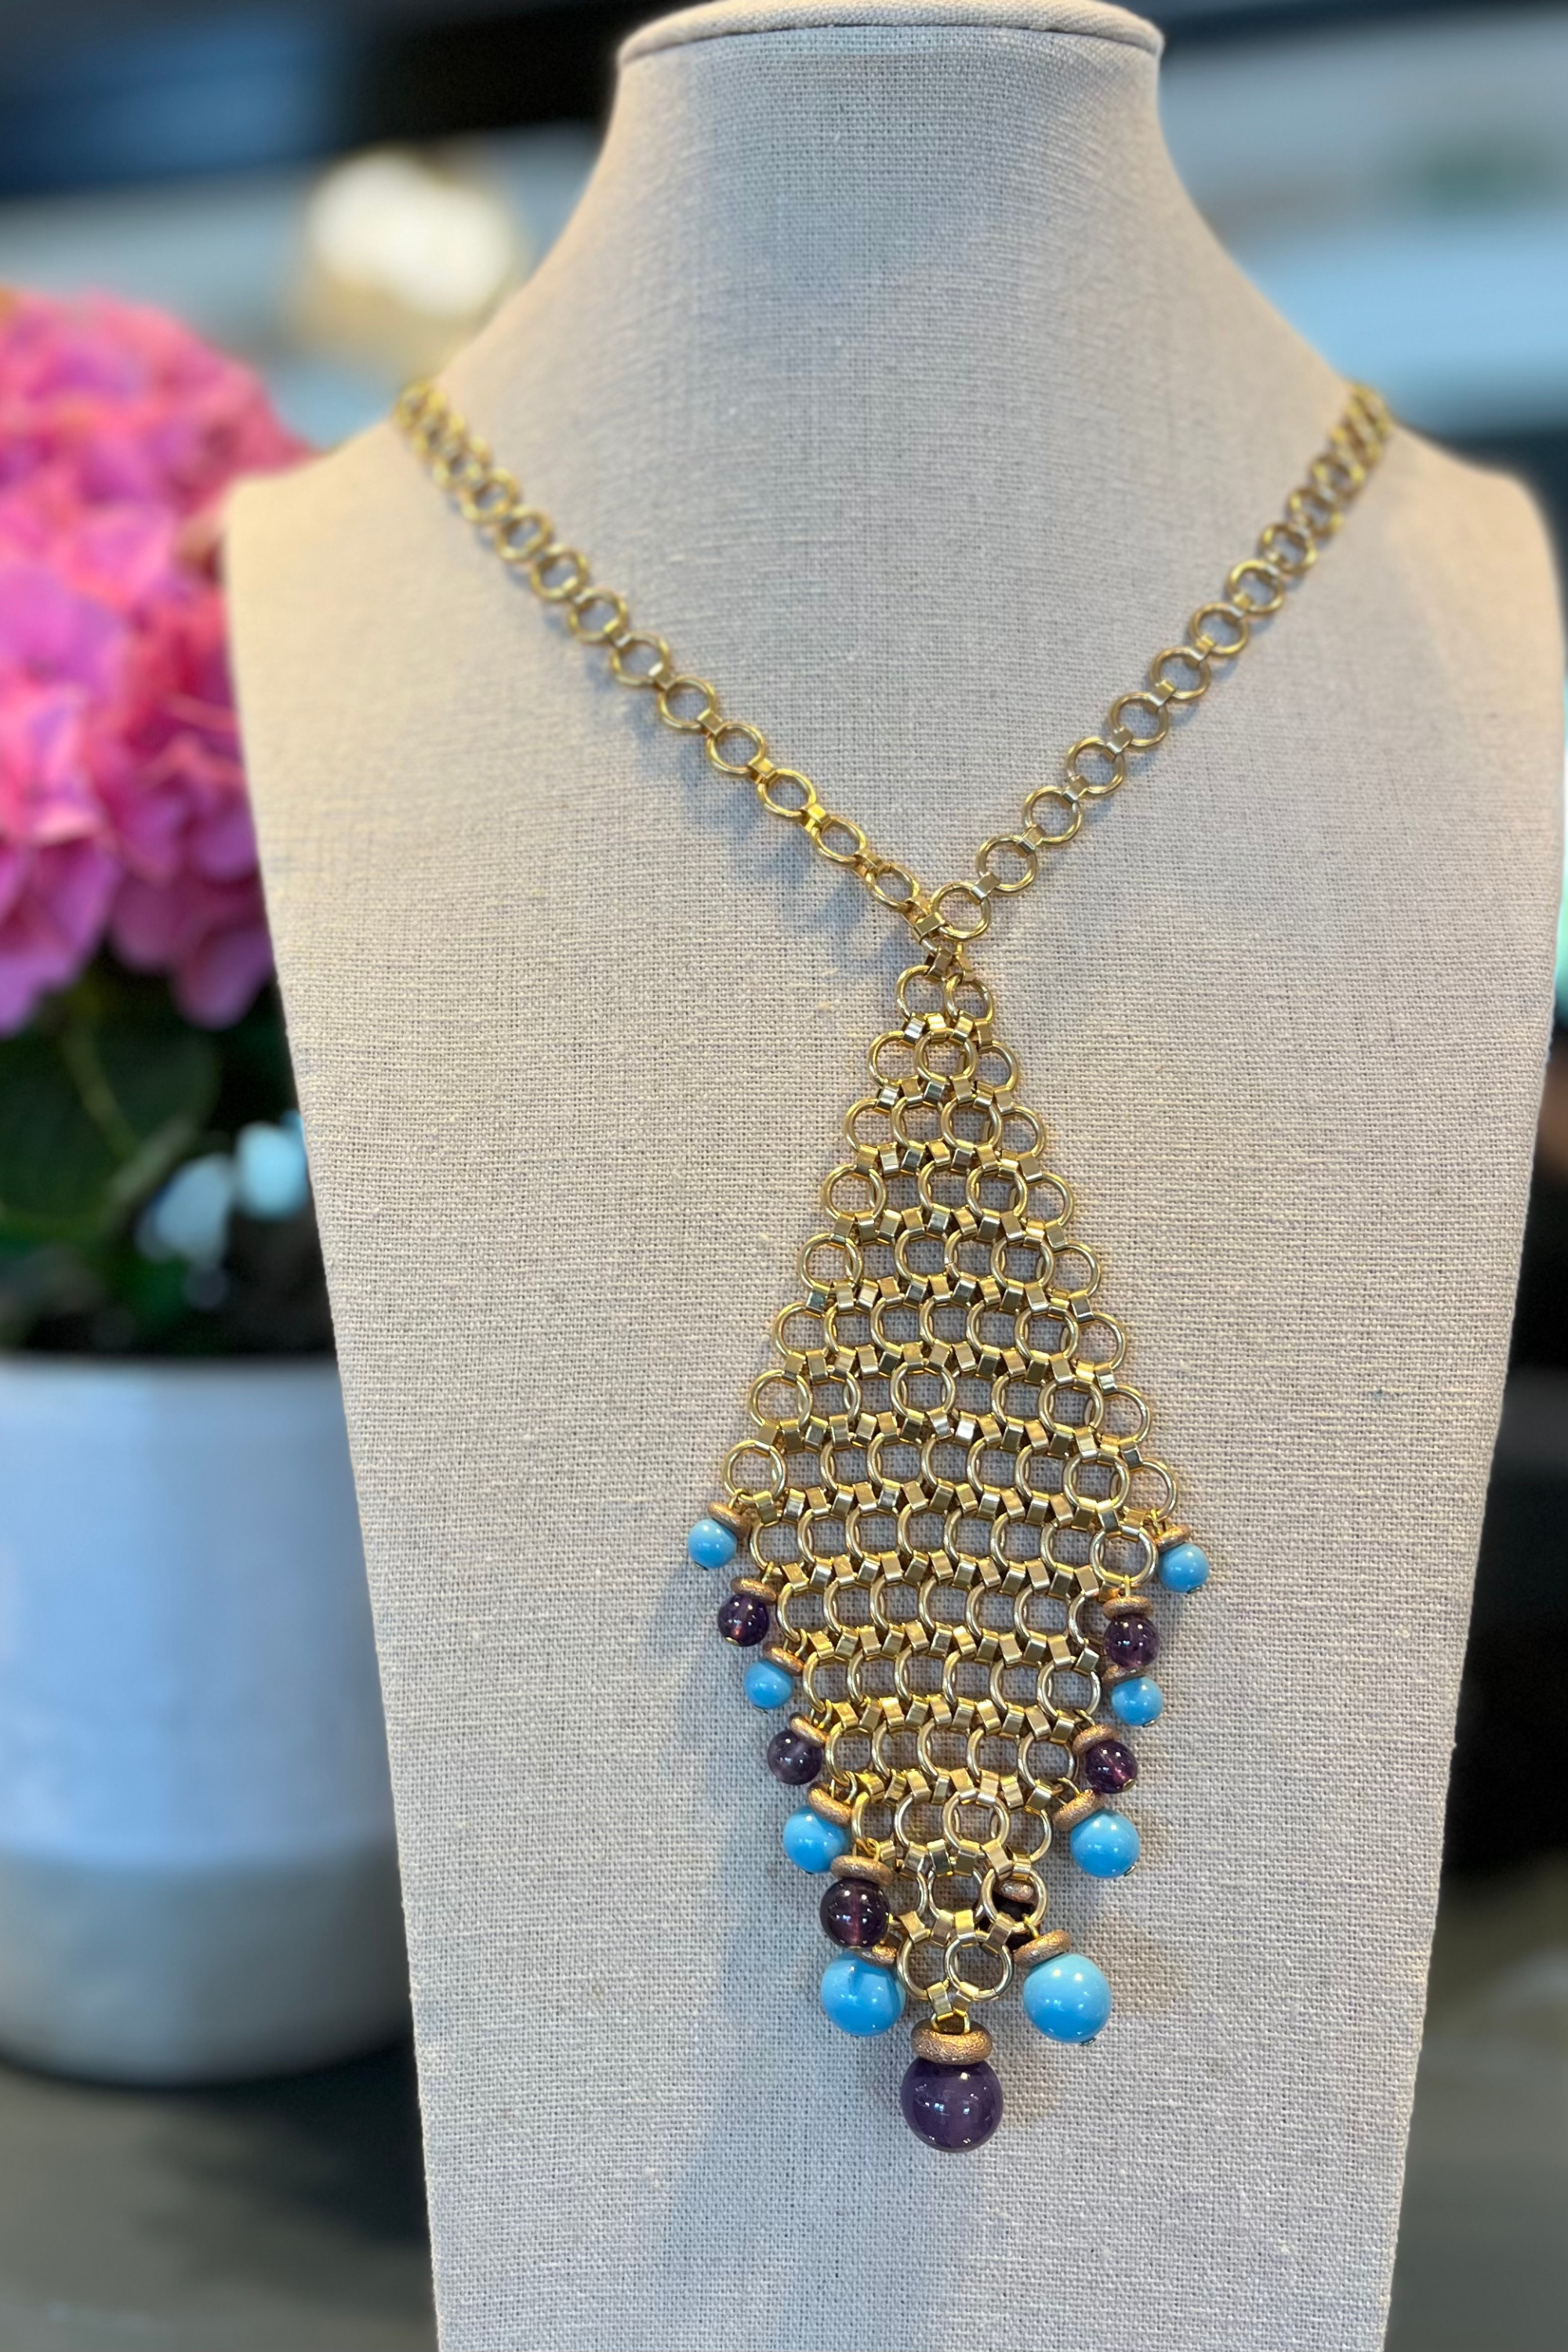 Honeycomb Amethyst & Turquoise Necklace by Melissa Kandiyoti, Honeycomb pattern, Bead embellishments, Belgium Brand, Made in France, New Arrivals at Espace Cannelle